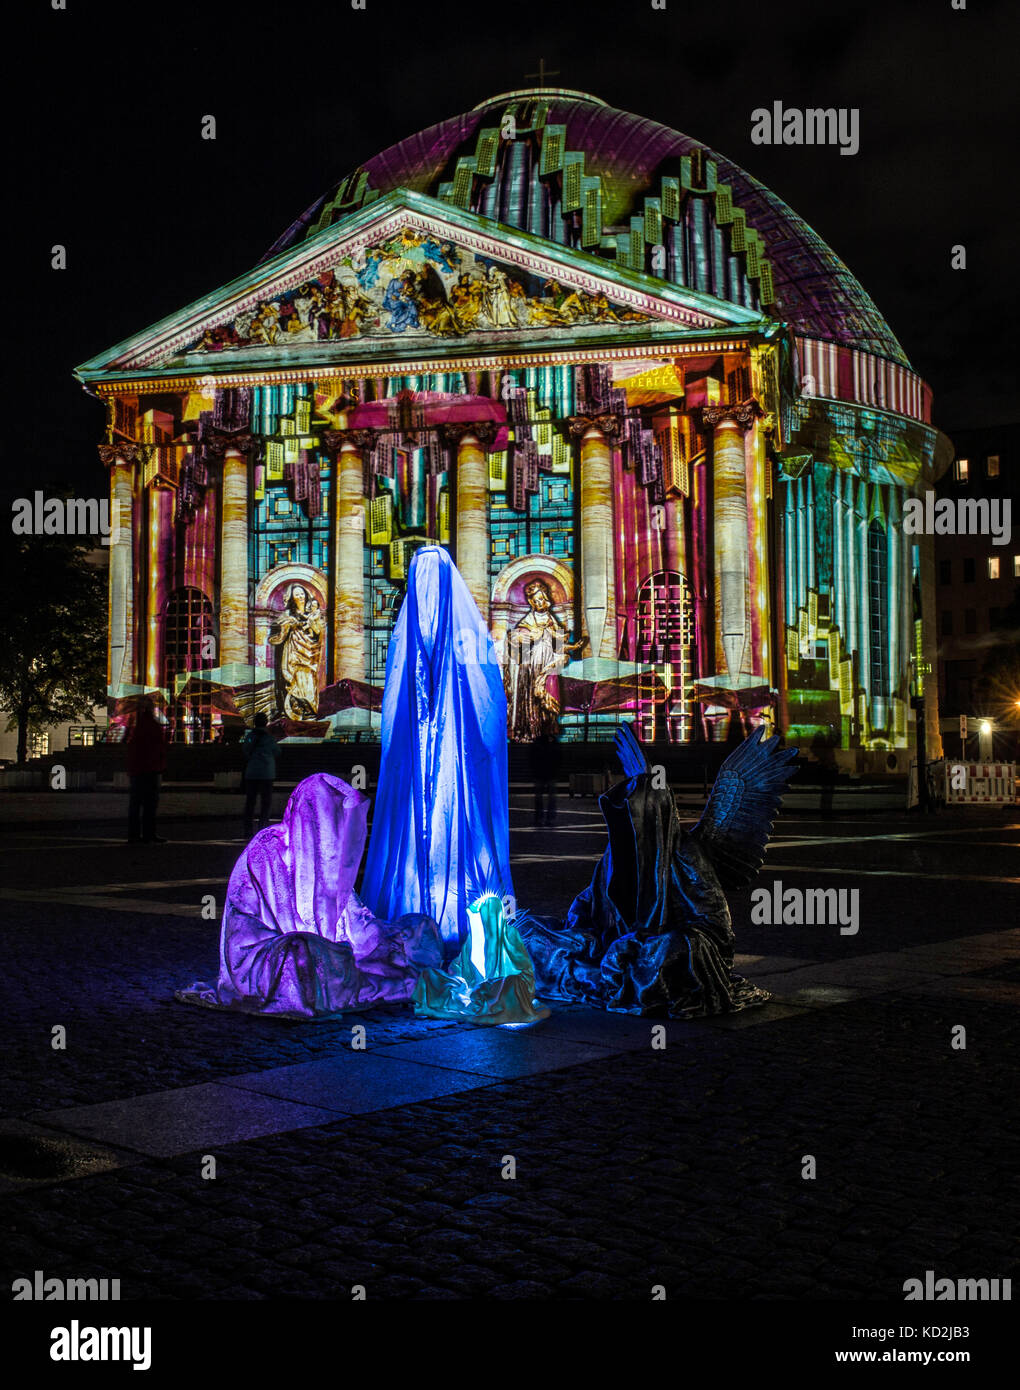 Berlin, Germany. 9th Oct, 2017. The art installation "Die Waechter der Zeit" (Guardians of Time) by light artist Manfred Kielnhofer pictured outside St. Hedwig's Cathedral during the Festival of Lights in Berlin, Germany, 9 October 2017. Credit: Paul Zinken/dpa/Alamy Live News Stock Photo